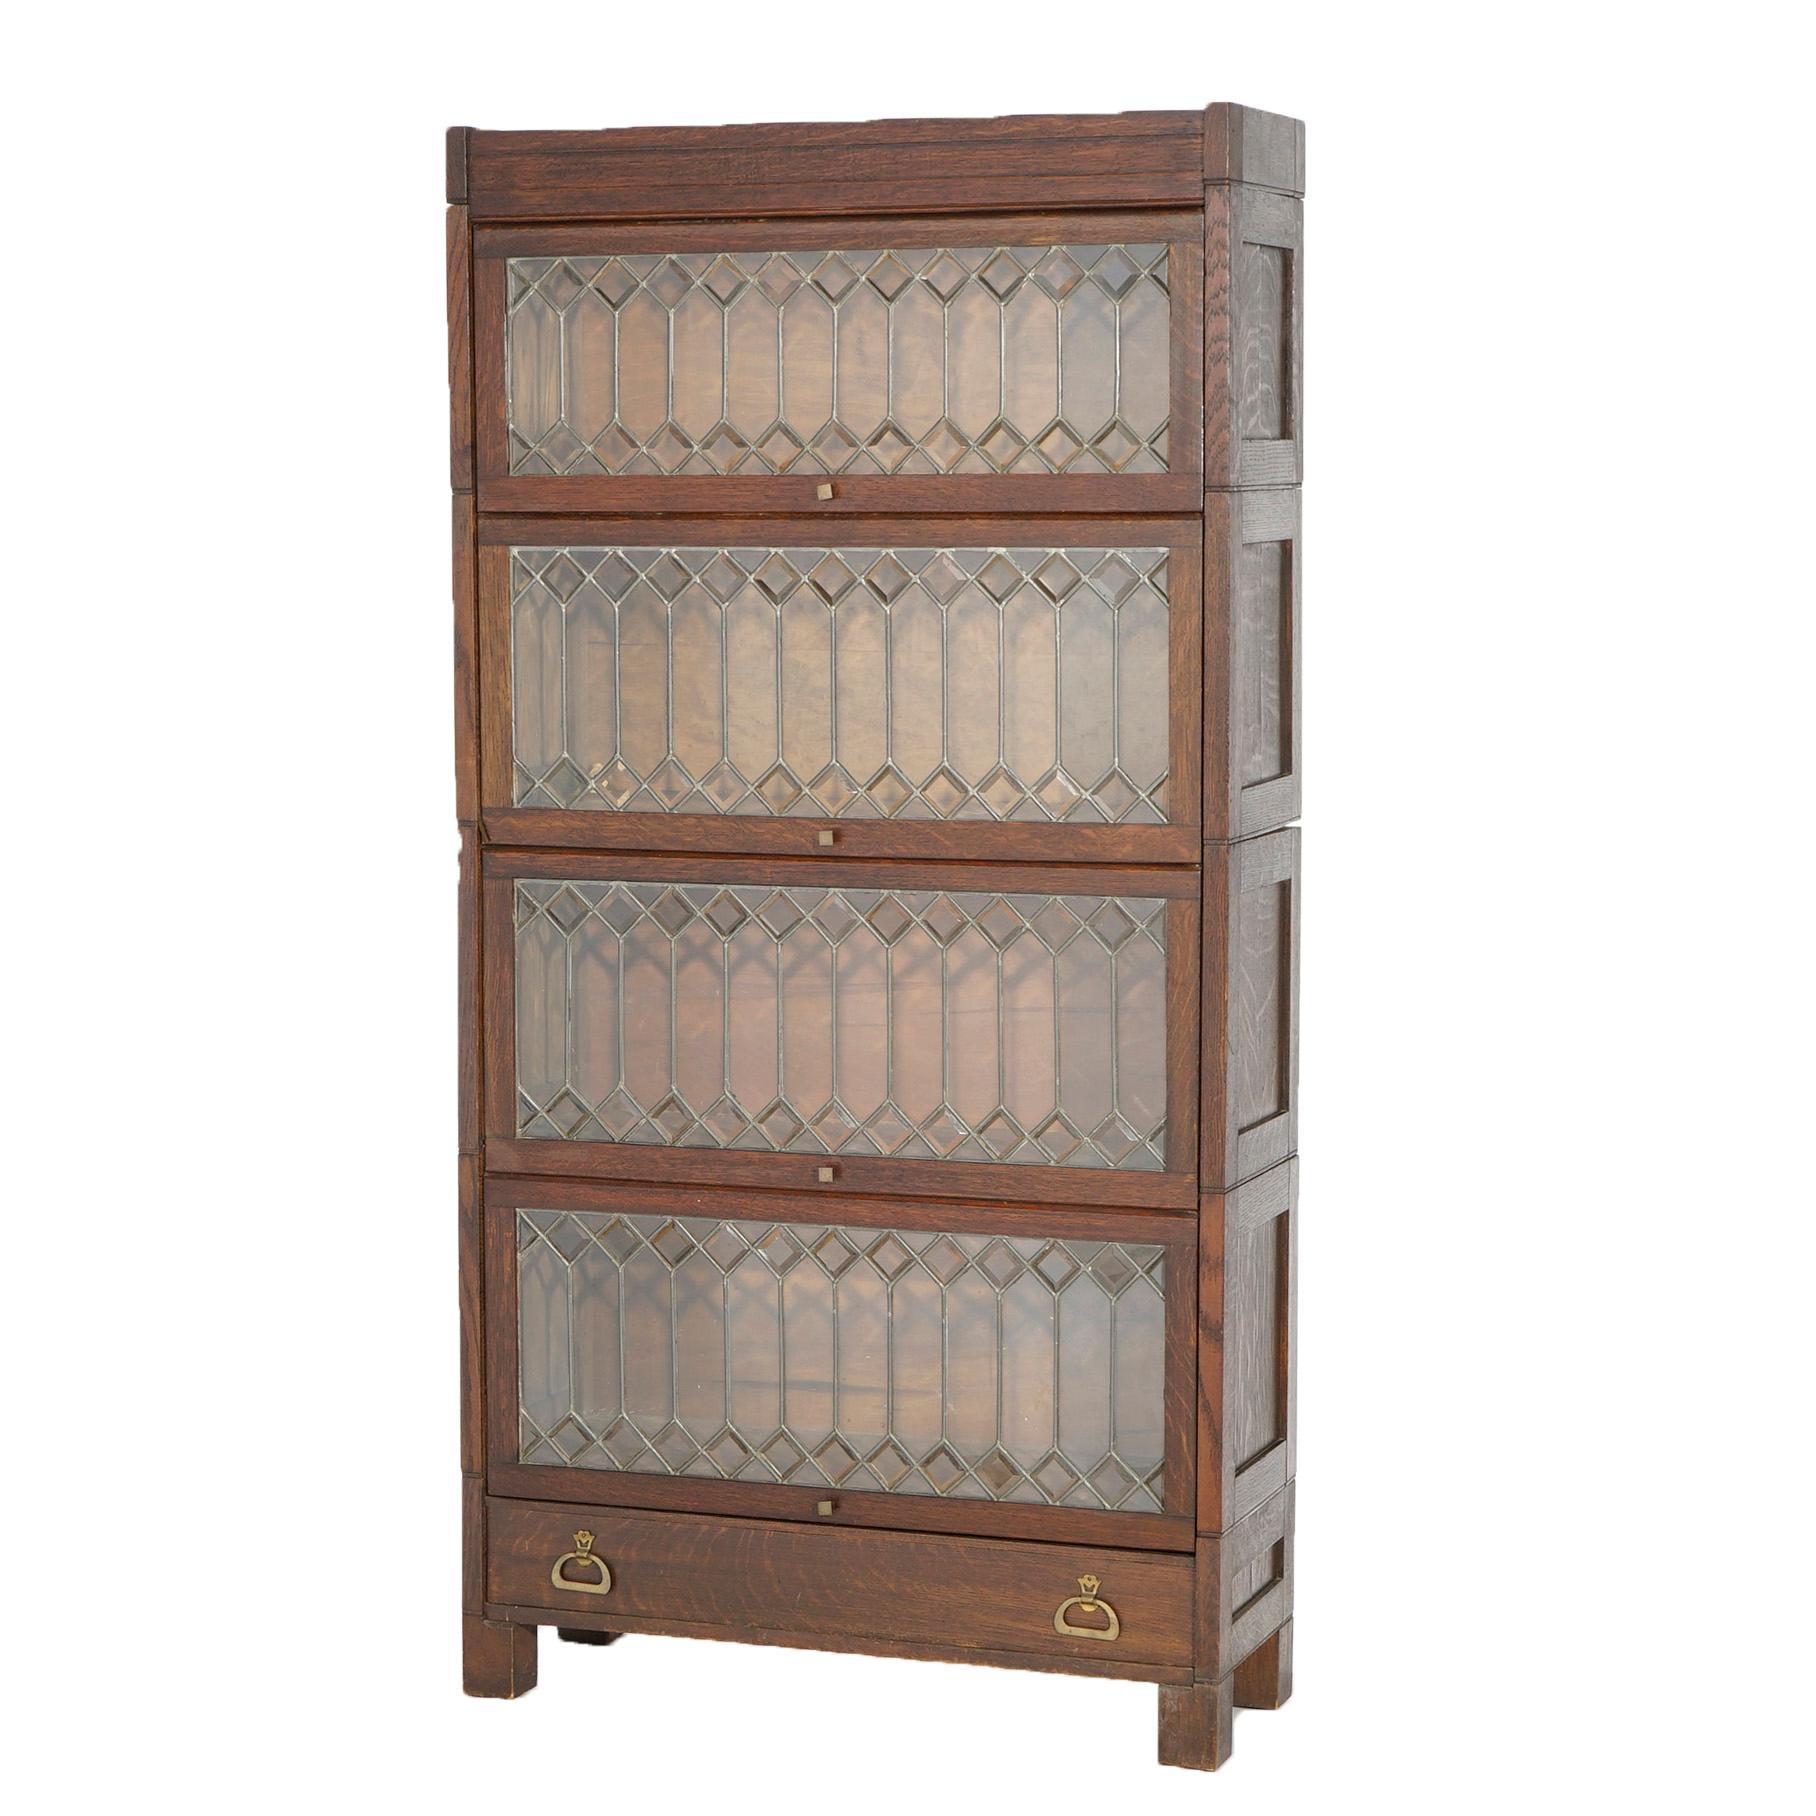 An antique Arts and Crafts Mission barrister bookcase offers oak construction with four stacks, each having pull out leaded glass doors, over base with drawer and raised on straight and square legs, circa 1910.

Measures- 66.75